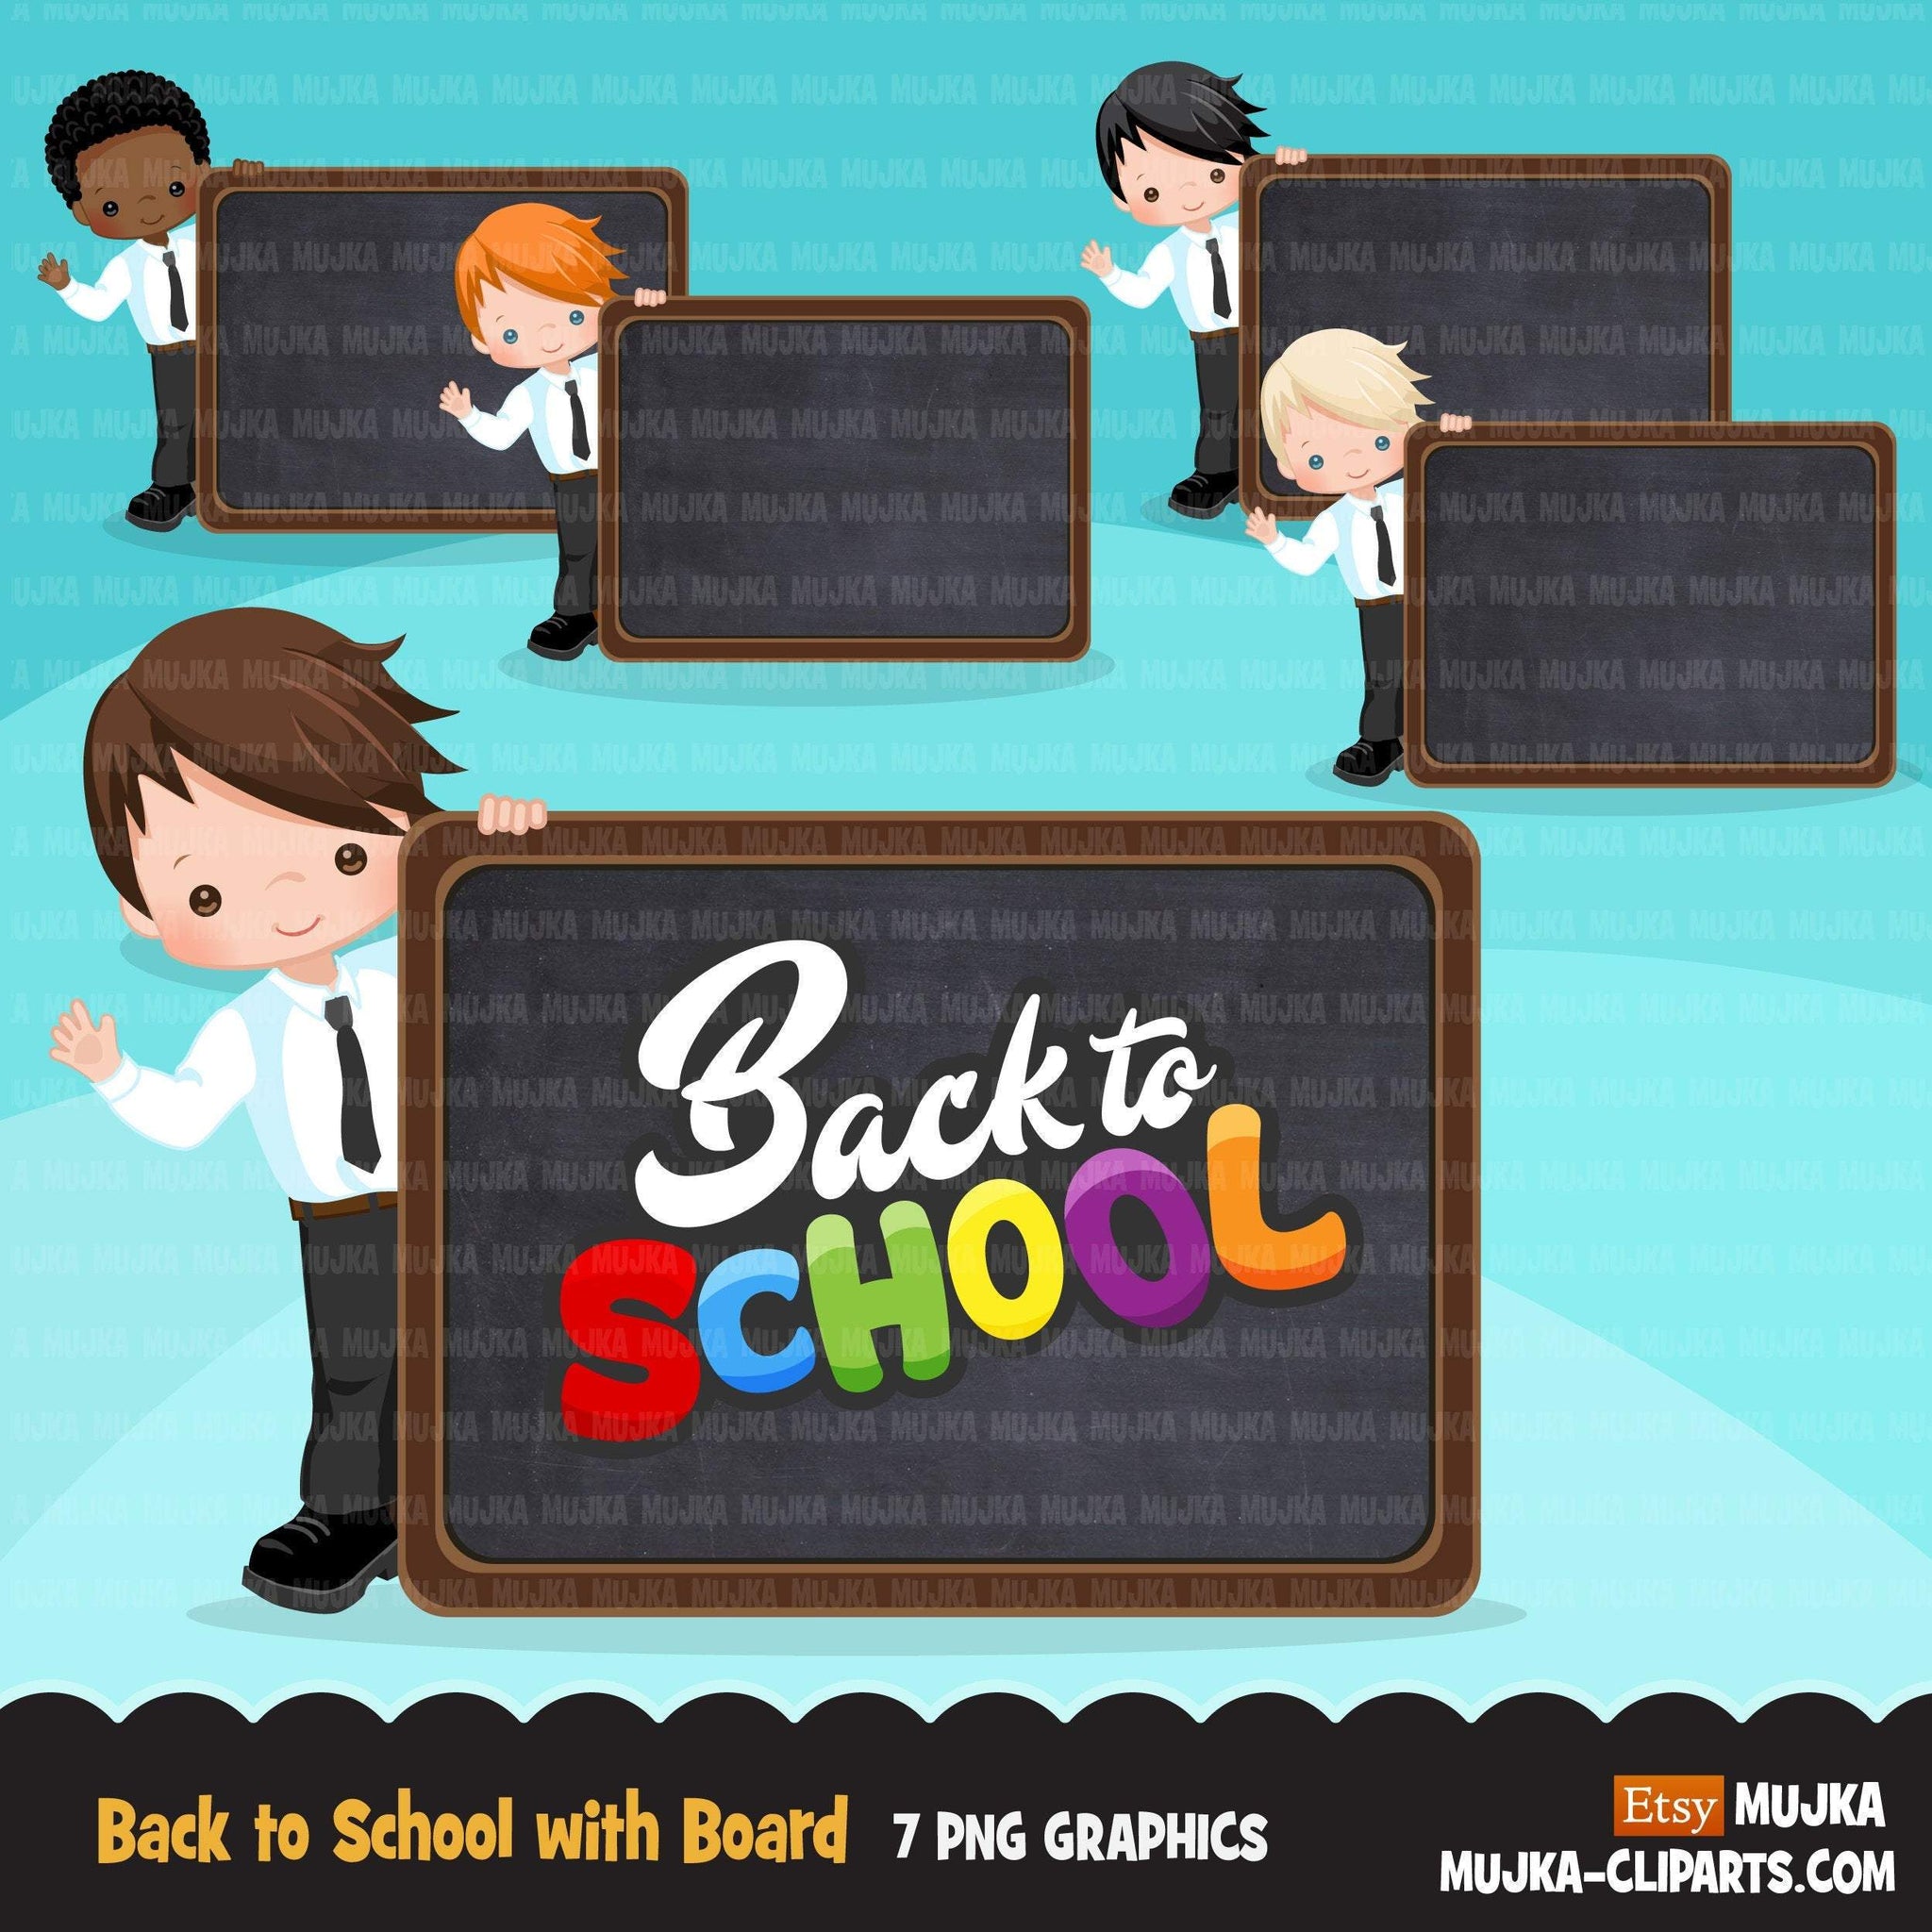 Back to school clipart with Boy students and black board, Education, teaching graphics